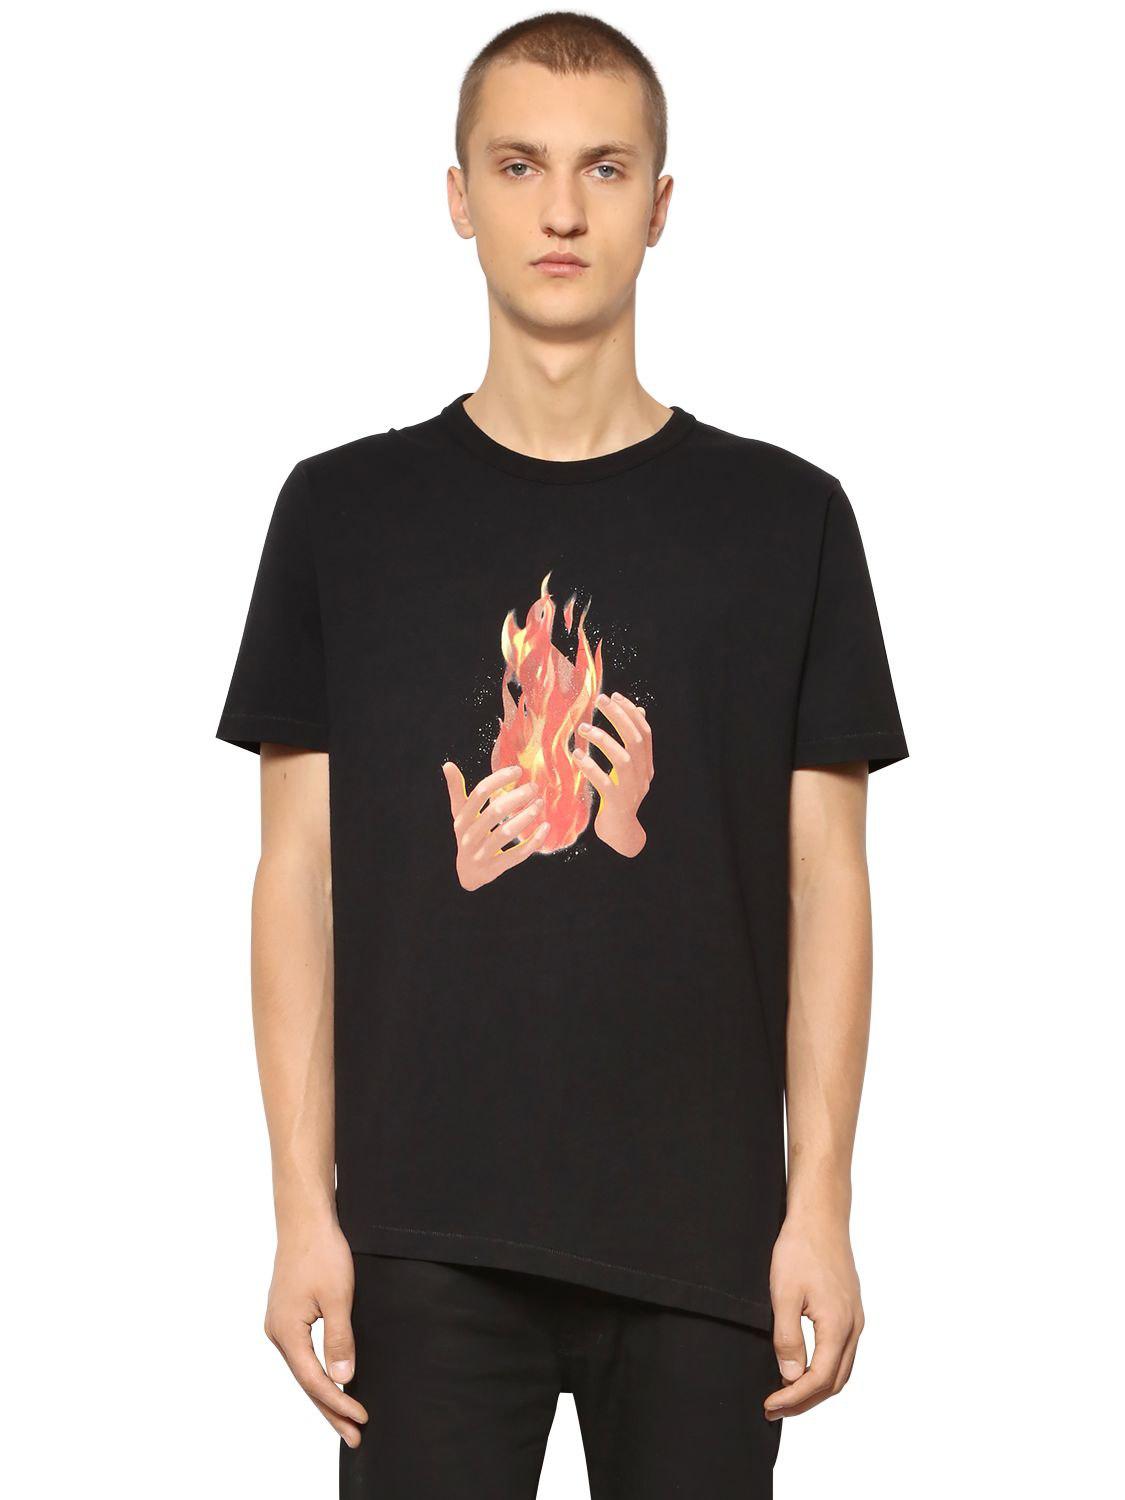 Off-White c/o Virgil Abloh Diag Fire Hands Cotton Jersey T-shirt in Black  for Men - Lyst